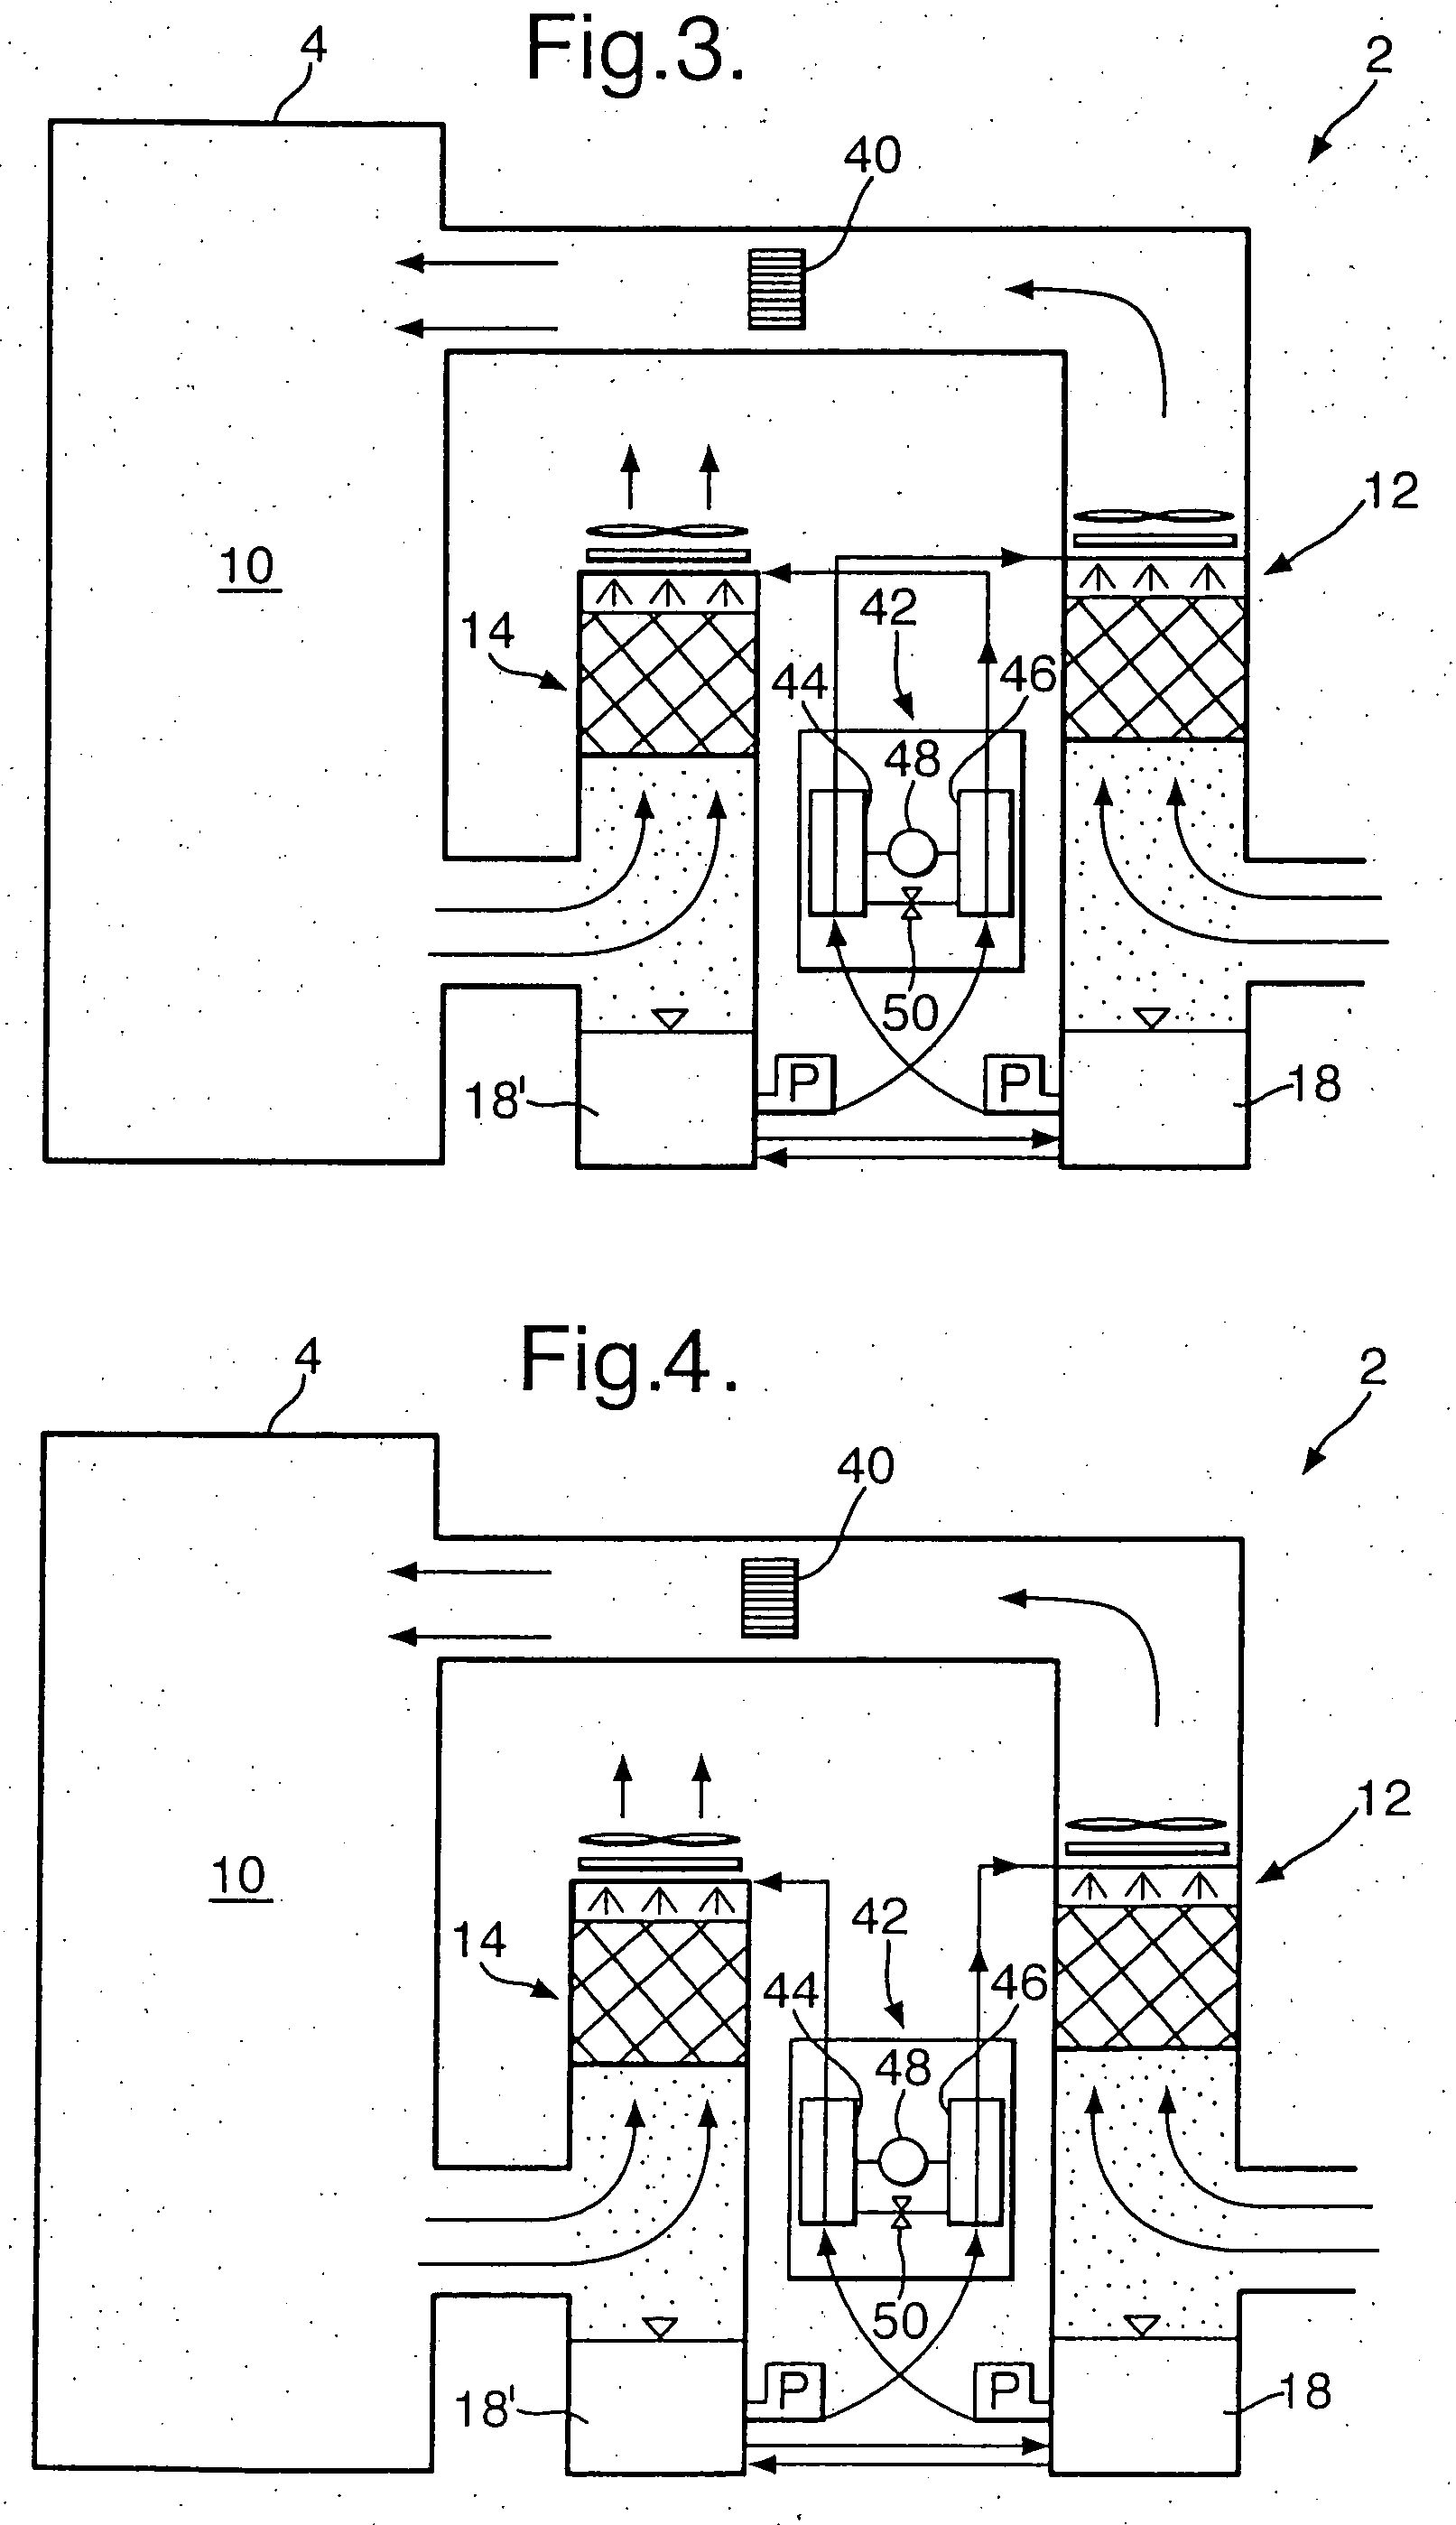 Air conditioning system and methods